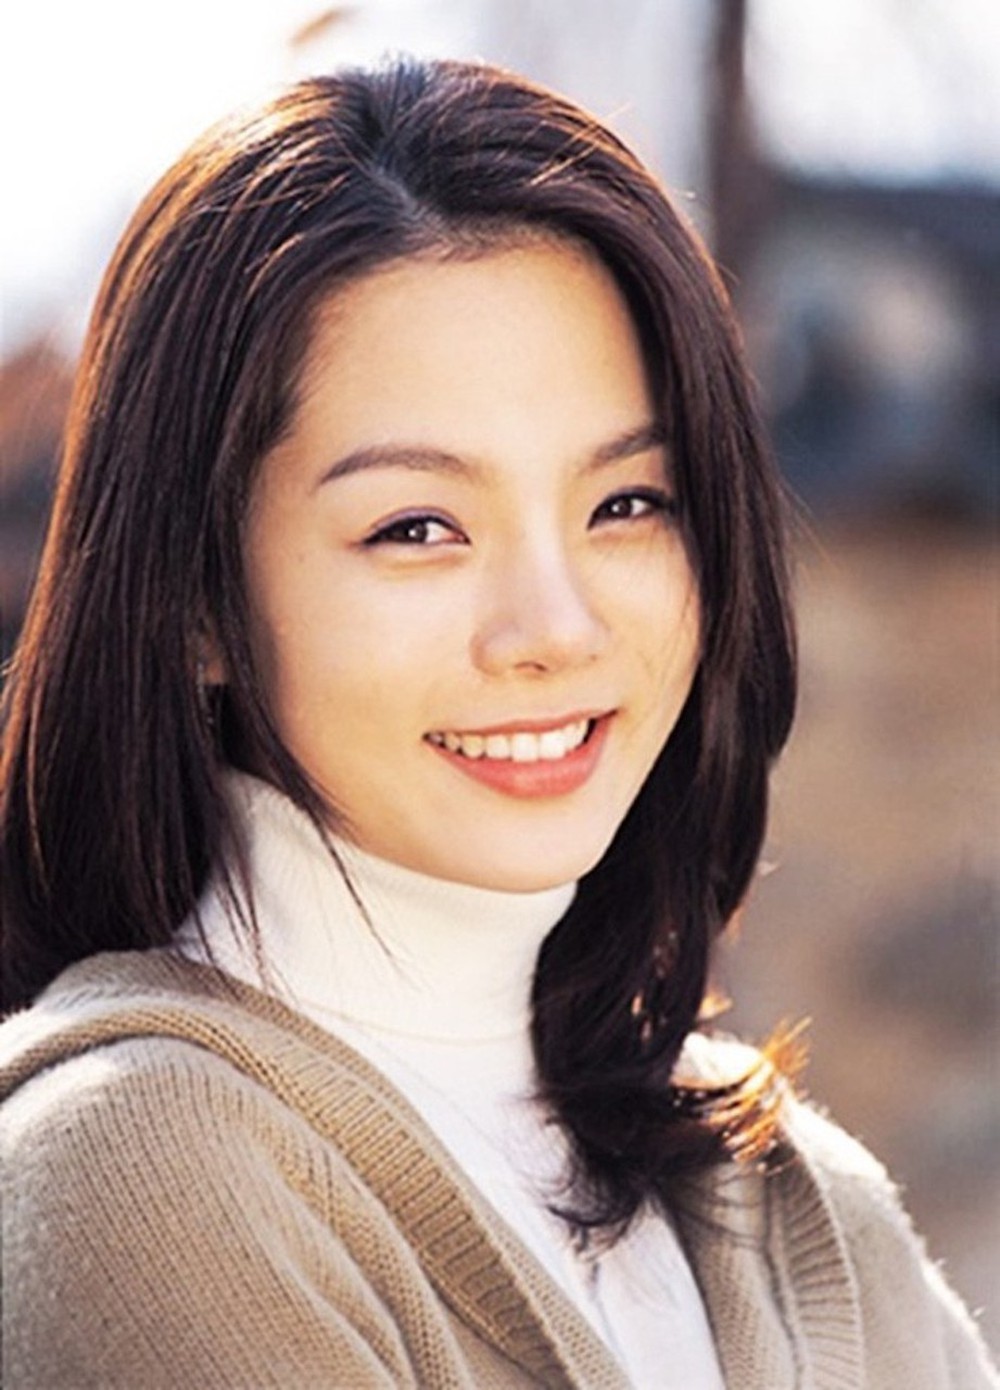   The once youthful goddess Chae Rim: Living a quiet, idyllic life with her children after ups and downs - Photo 5.